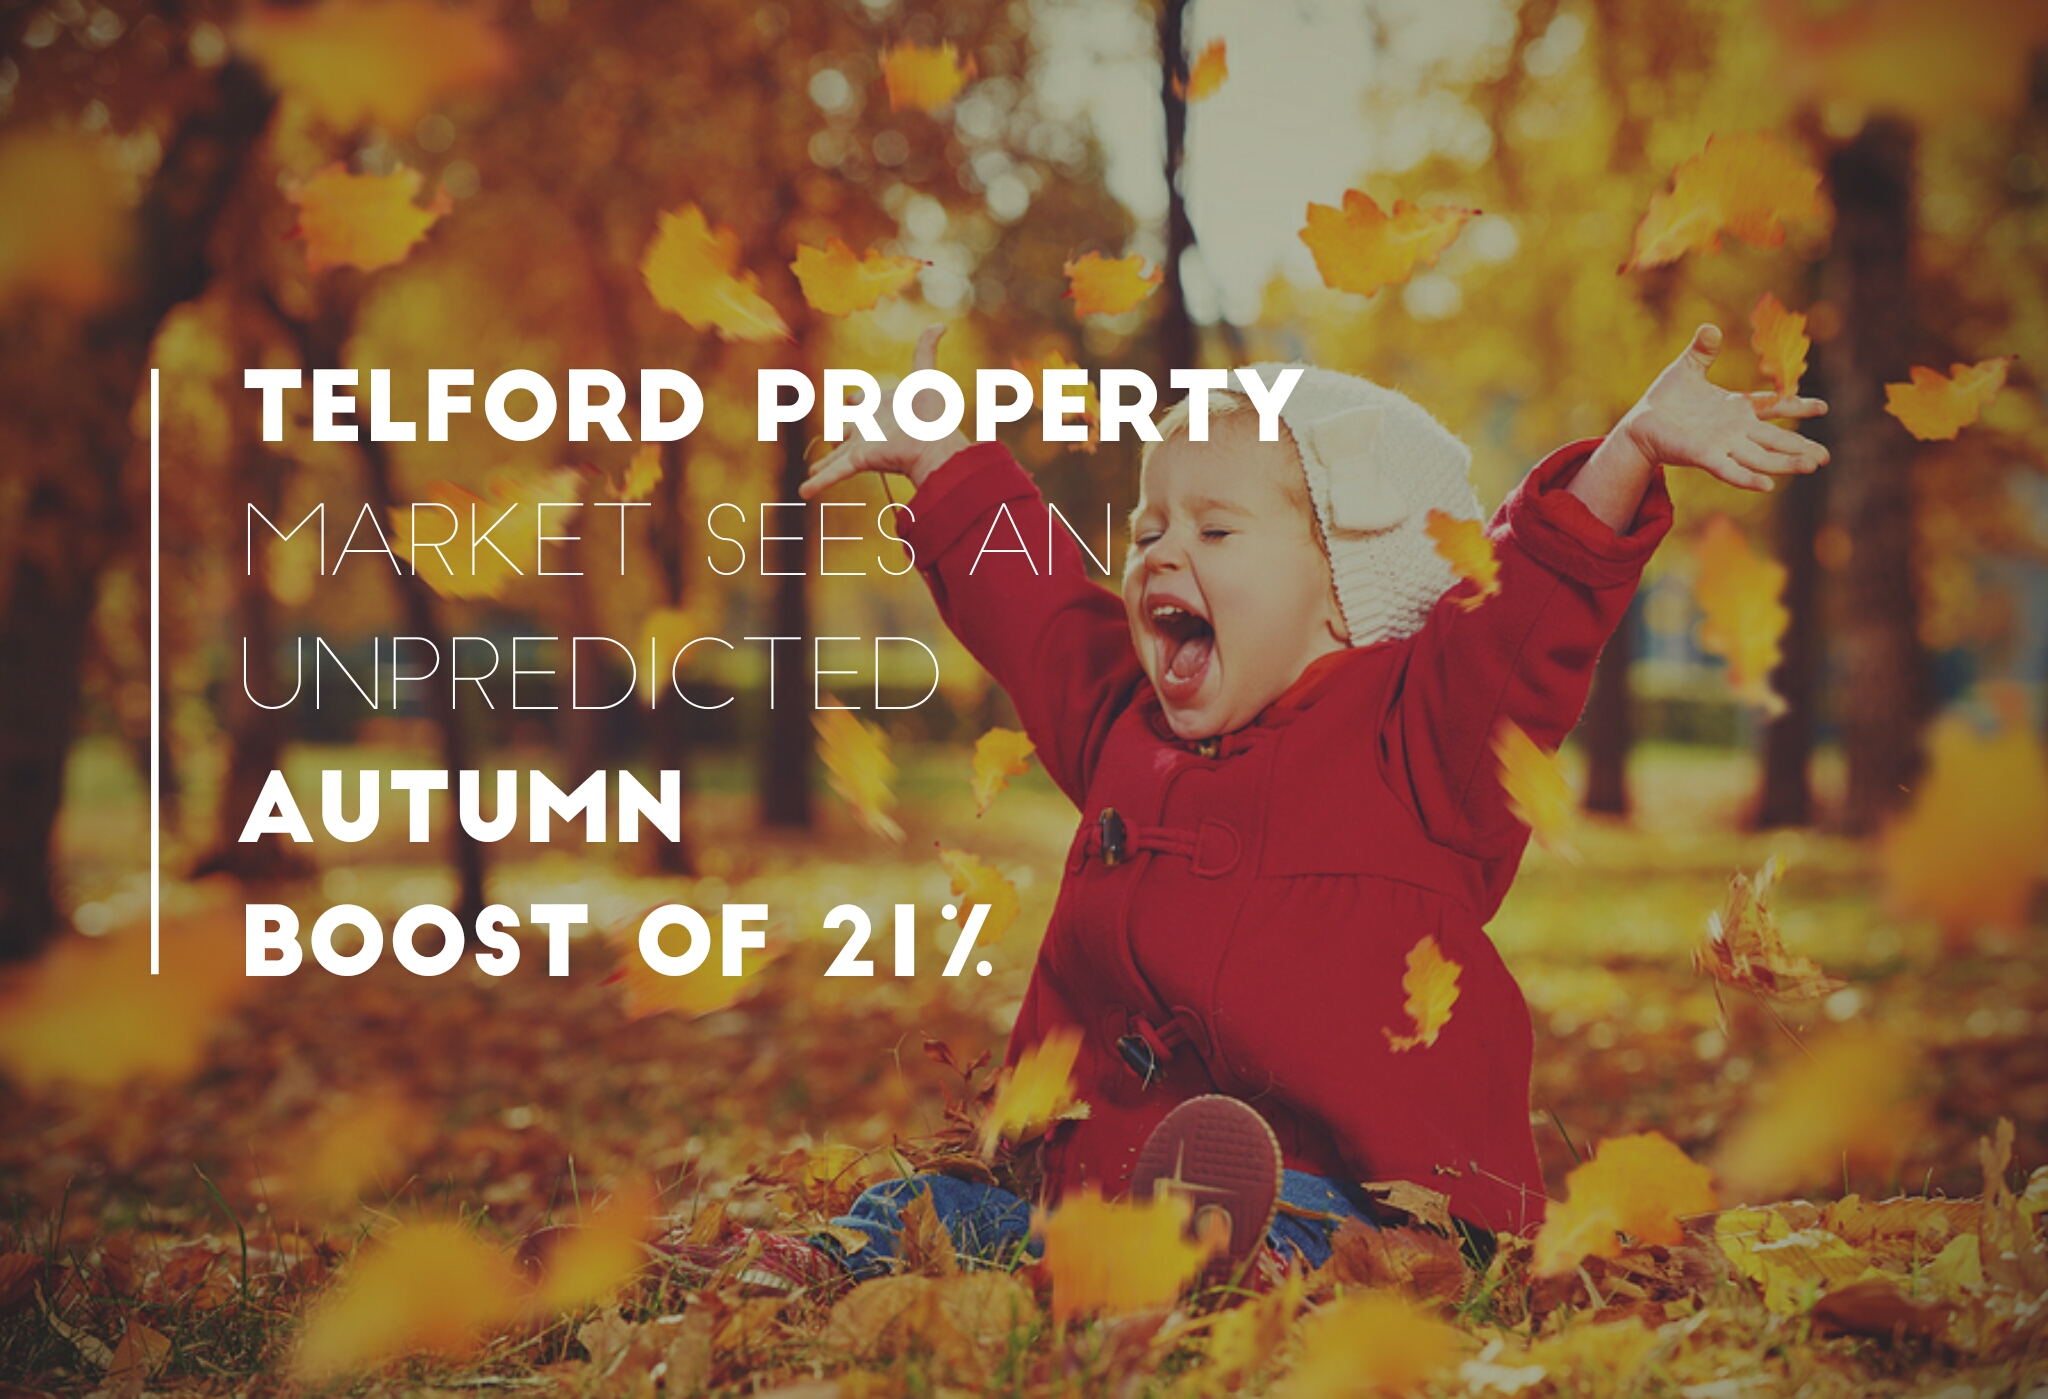 Telford Property Market Sees An Unpredicted Autumn Boost of 21%